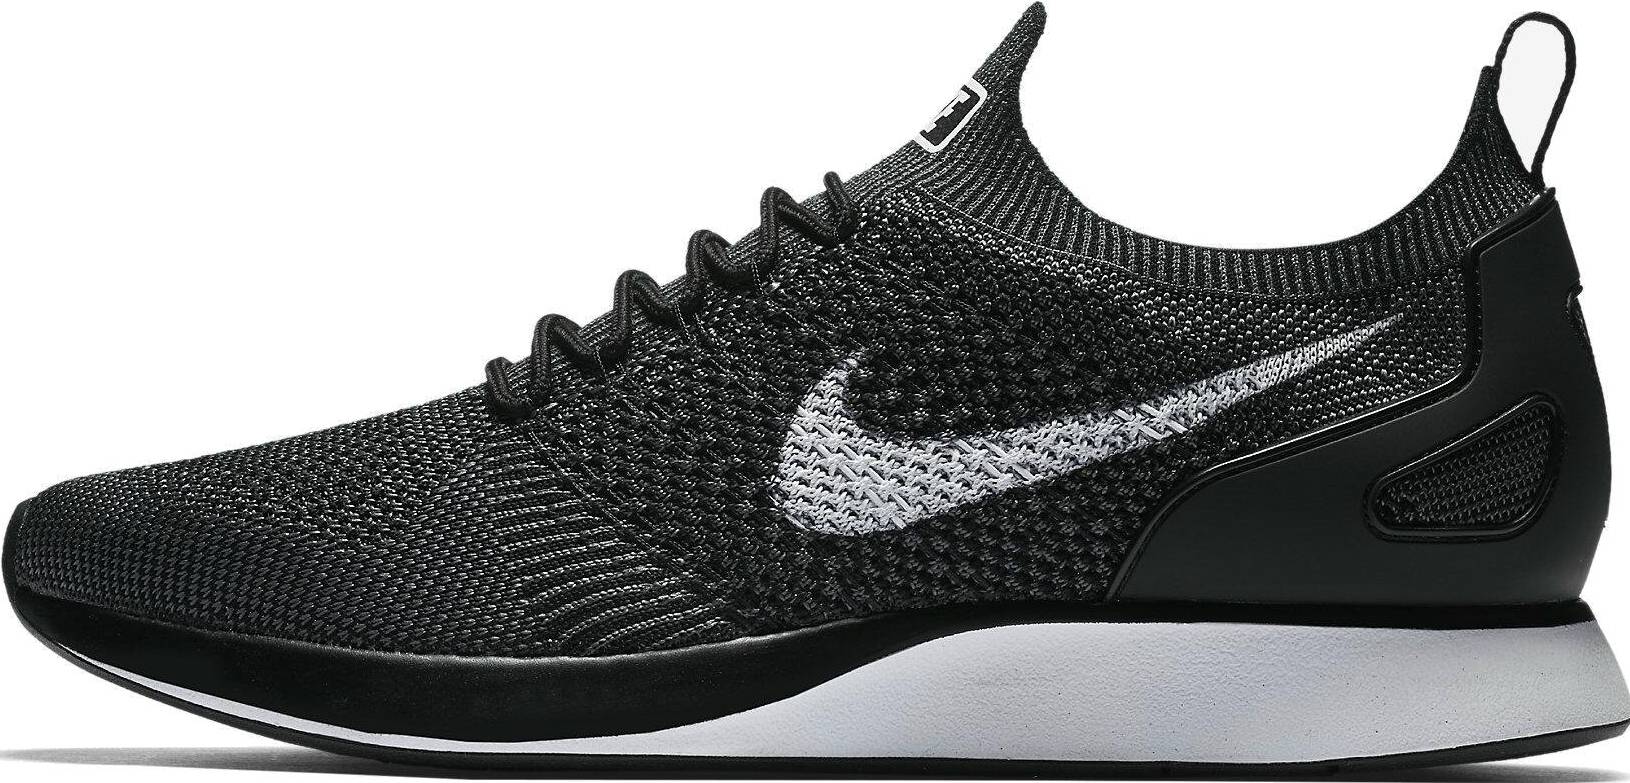 Nike Air Zoom Mariah Flyknit Racer sneakers in red green (only ...